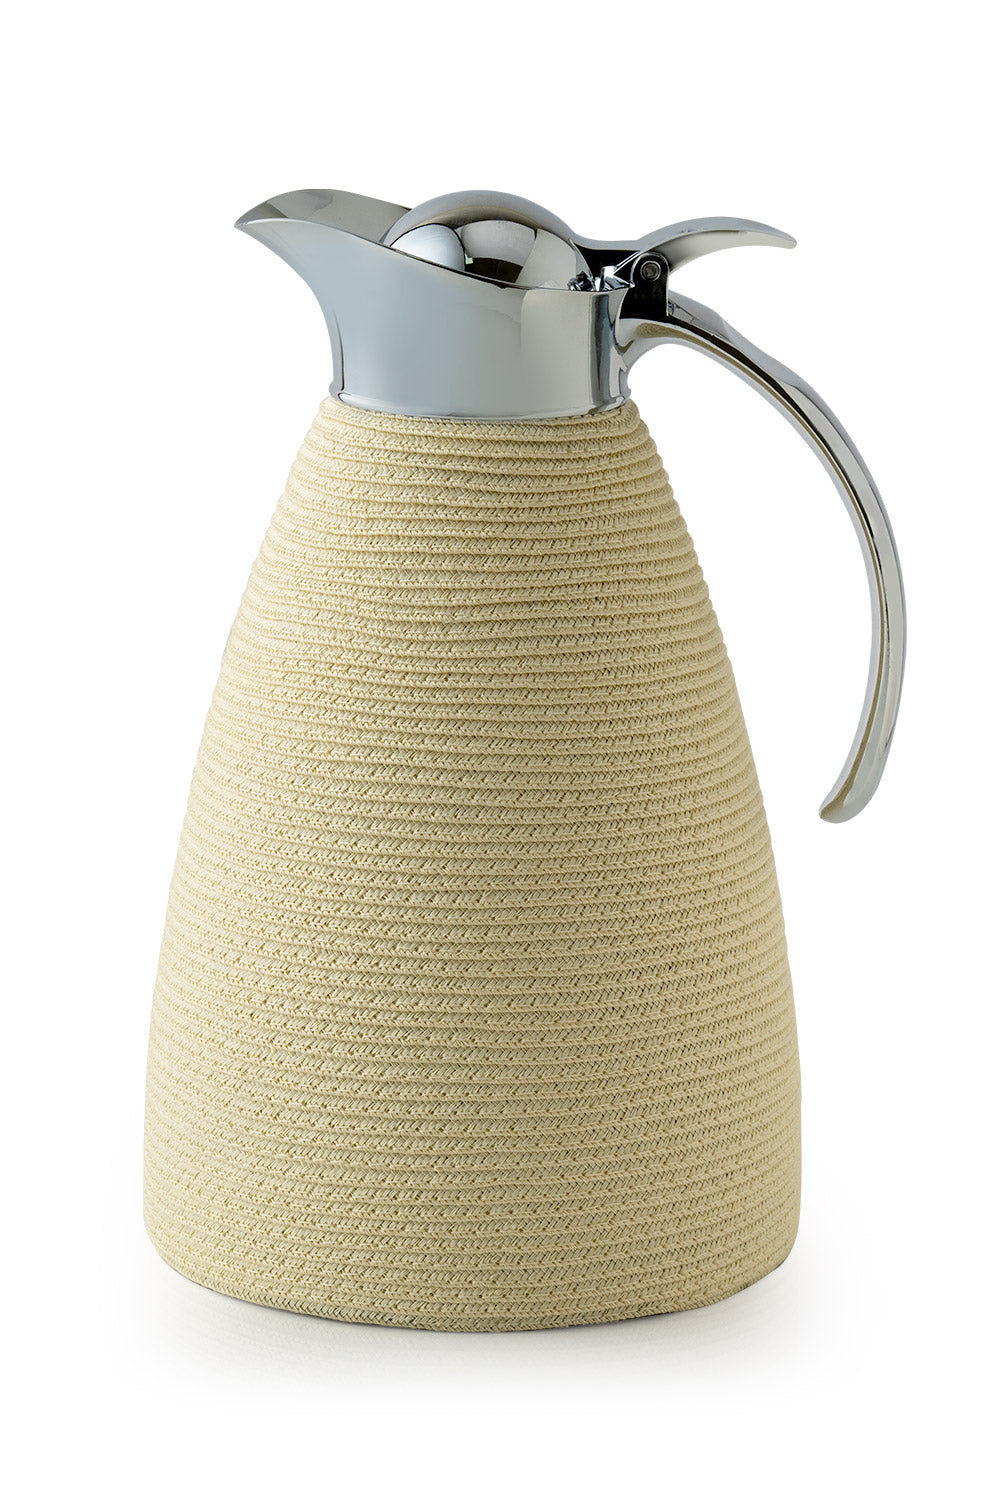 Monceau Thermal Carafe 1.5 L, Ivory